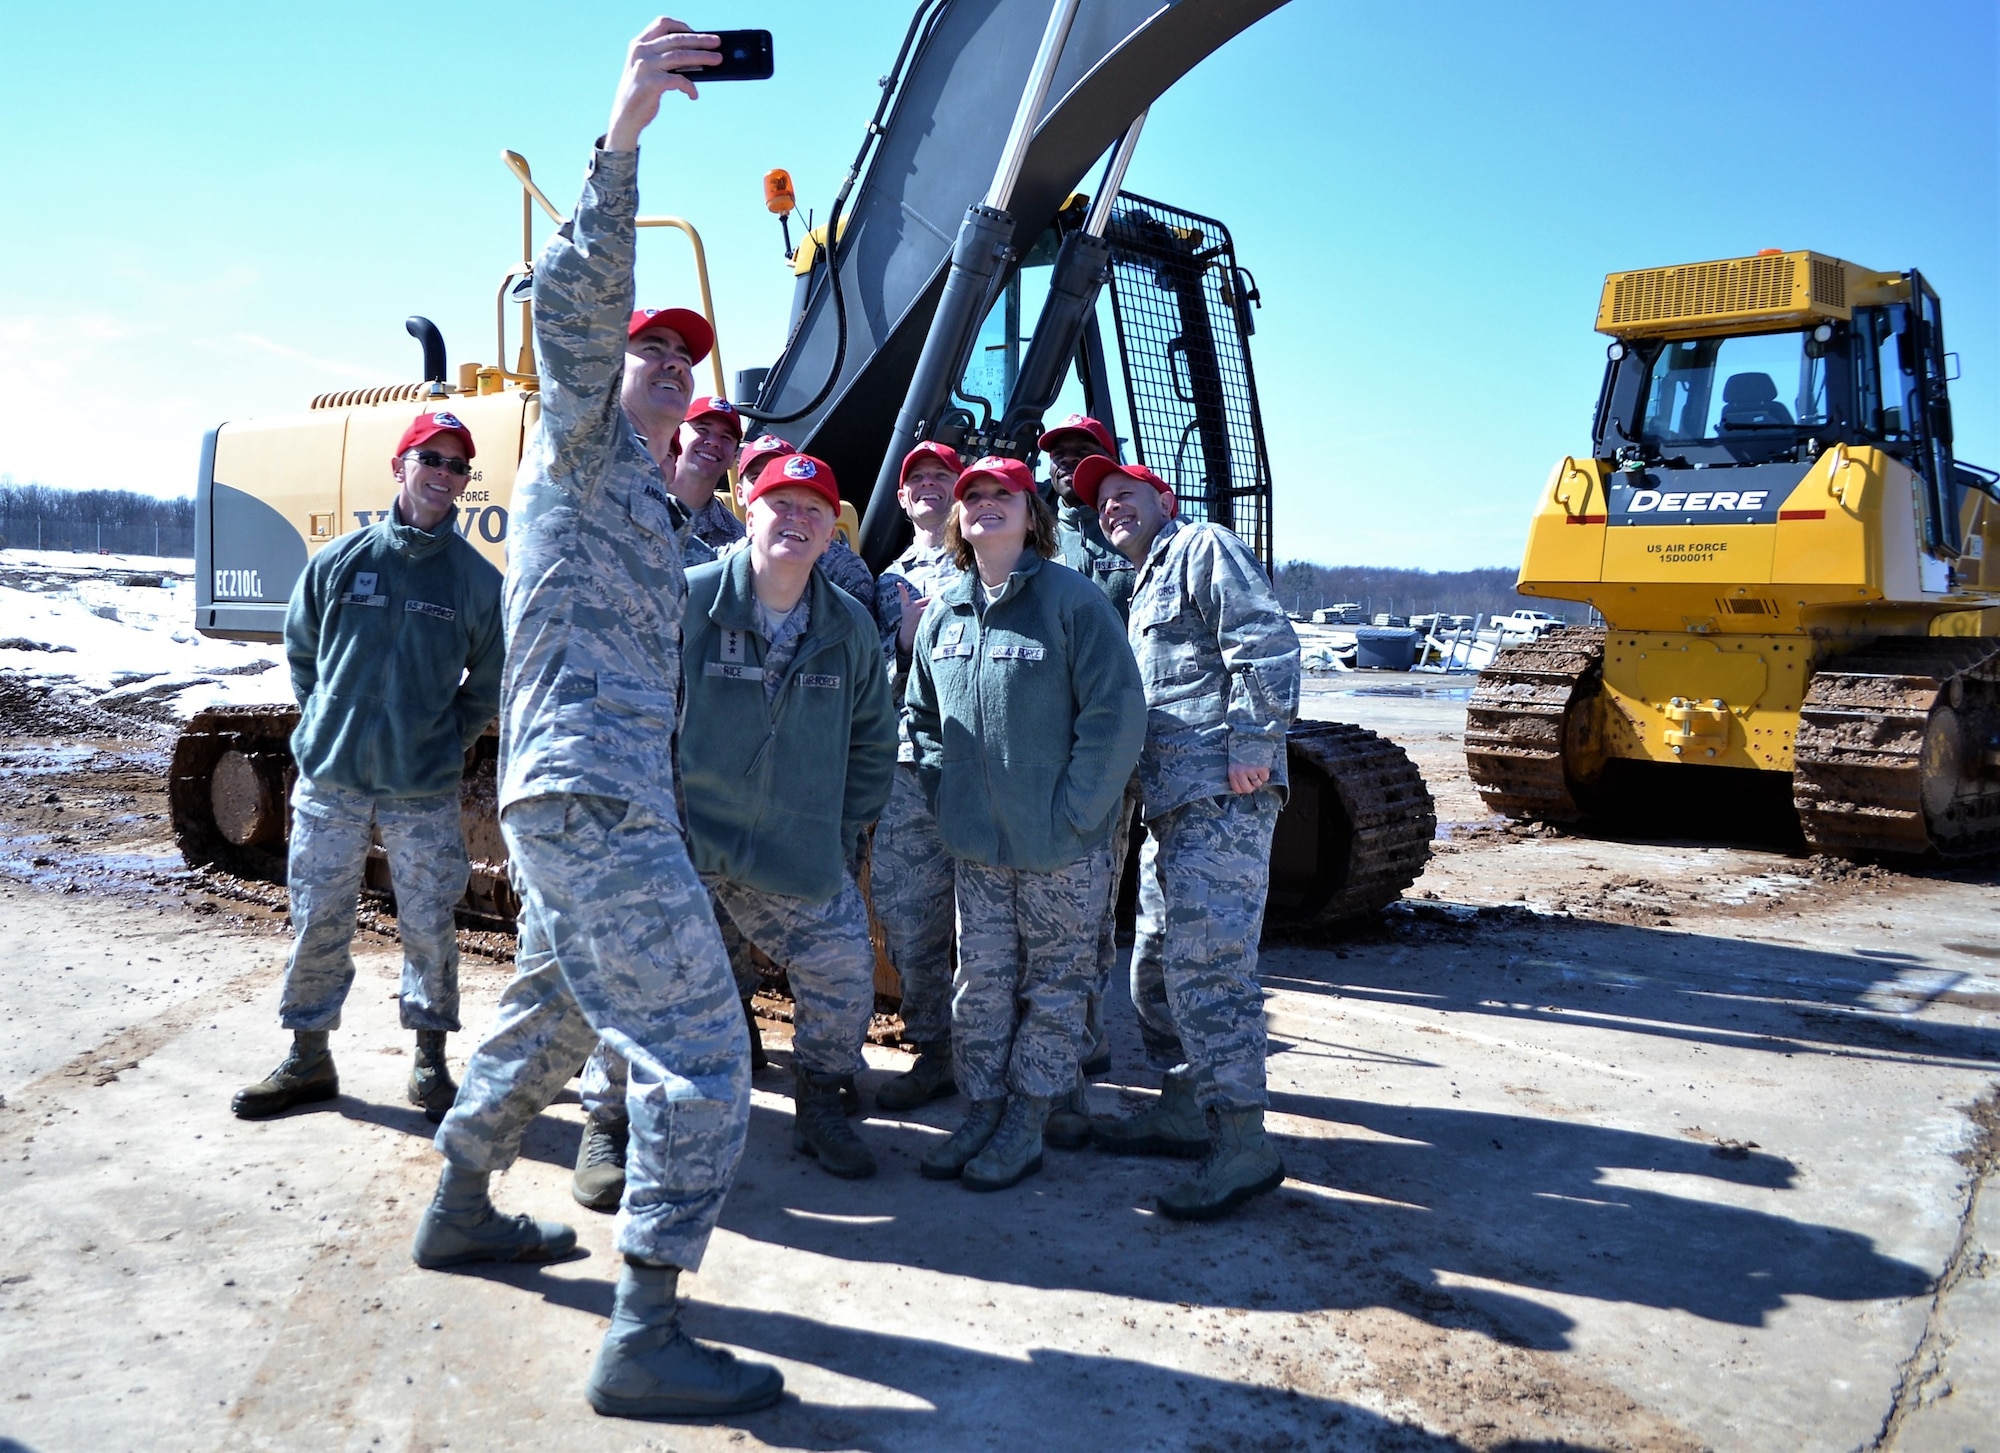 Chief Master Sgt. Ronald C. Anderson, command chief master sergeant of the Air National Guard, takes a selfie with members of the 201st Rapid Engineer Deployable Heavy Operational Repair Squadron Engineer Squadron, Det. 1, and Lt. Gen. L. Scott Rice, director of the ANG, Horsham Air Guard Station, March 11, 2018. The lieutenant general and command chief master sergeant received some hands-on experiences with the missions of various units in the 111th Attack Wing. (U.S. Air National Guard photo by Tech. Sgt. Andria Allmond)